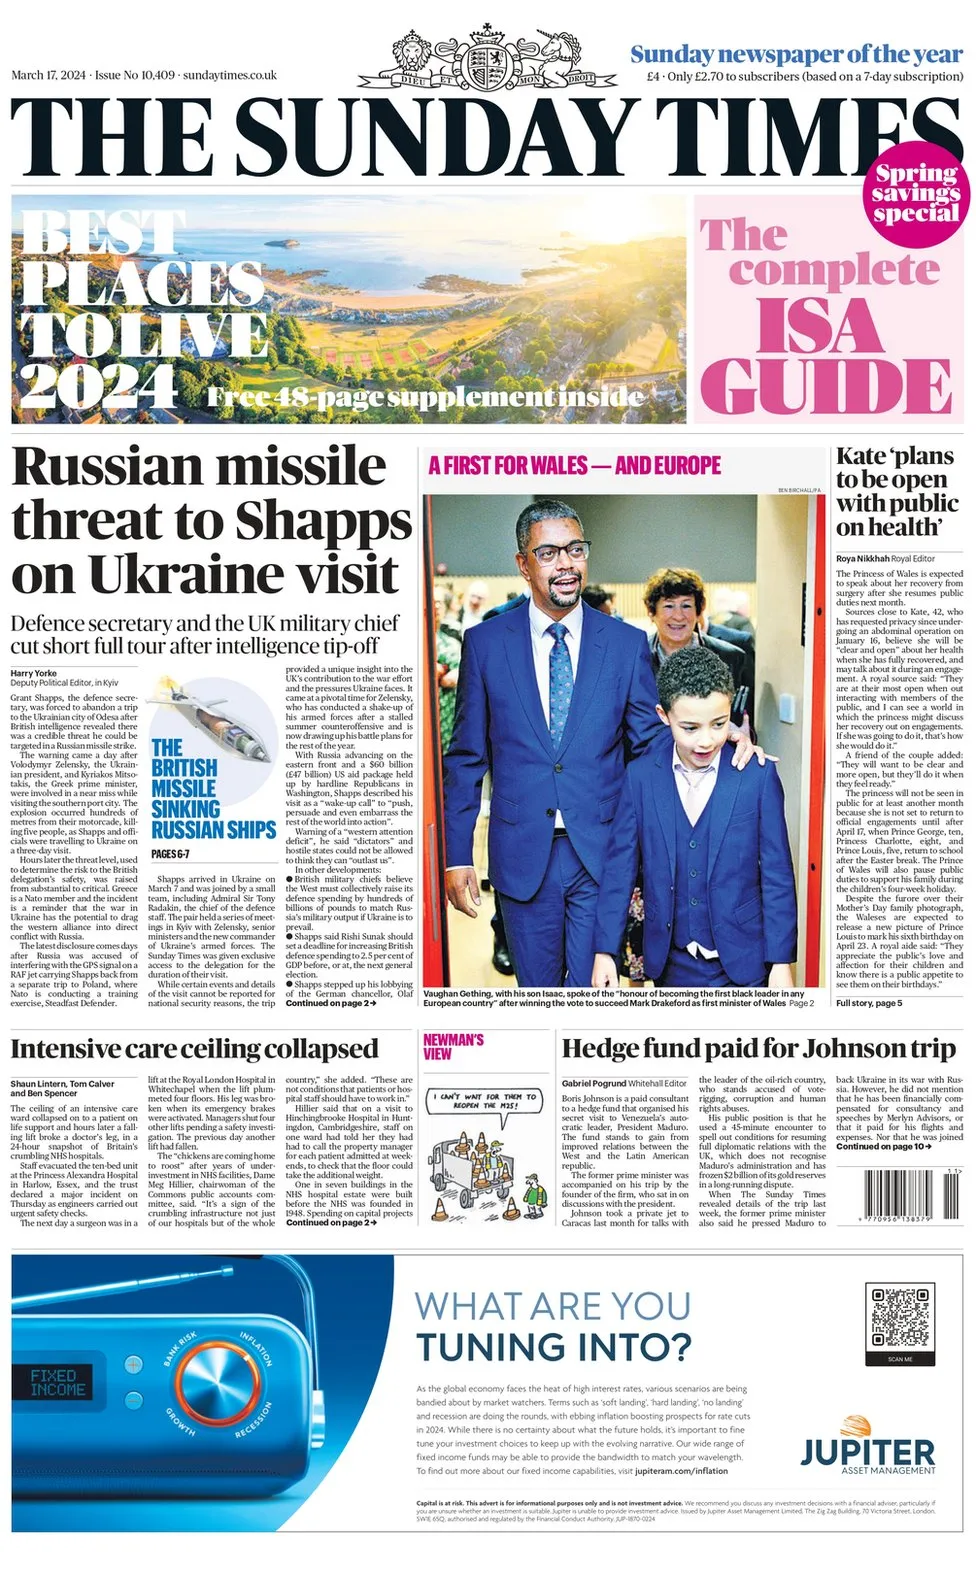 The Sunday Times - Russian missile threat to Shapps on Ukraine visit 